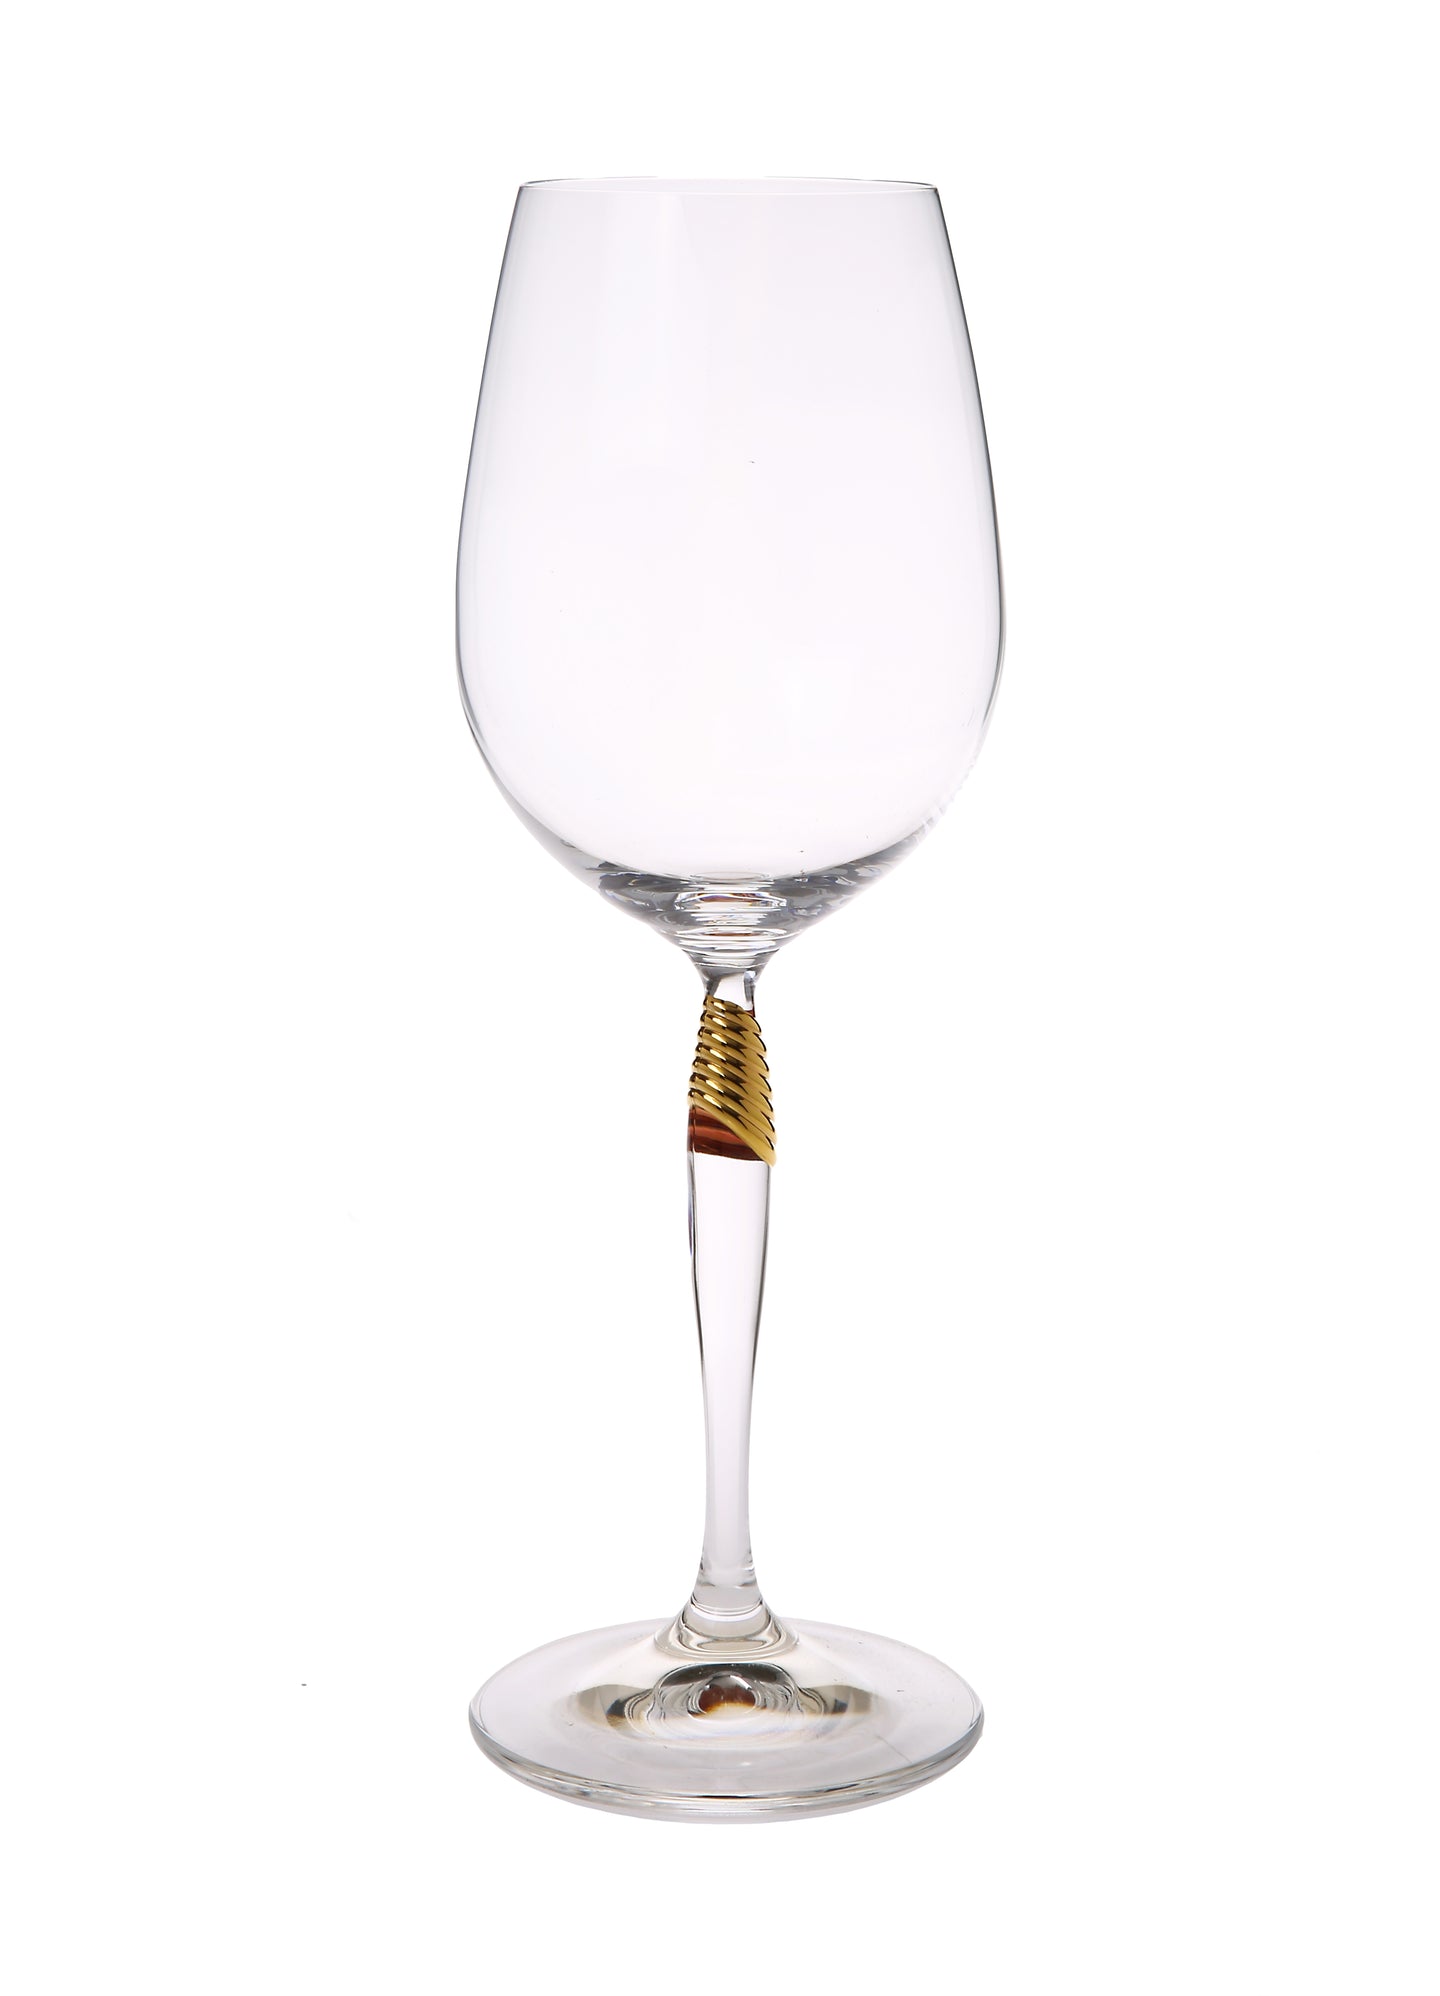 Set Of 6 Wine Glasses With Gold Detail On Stem